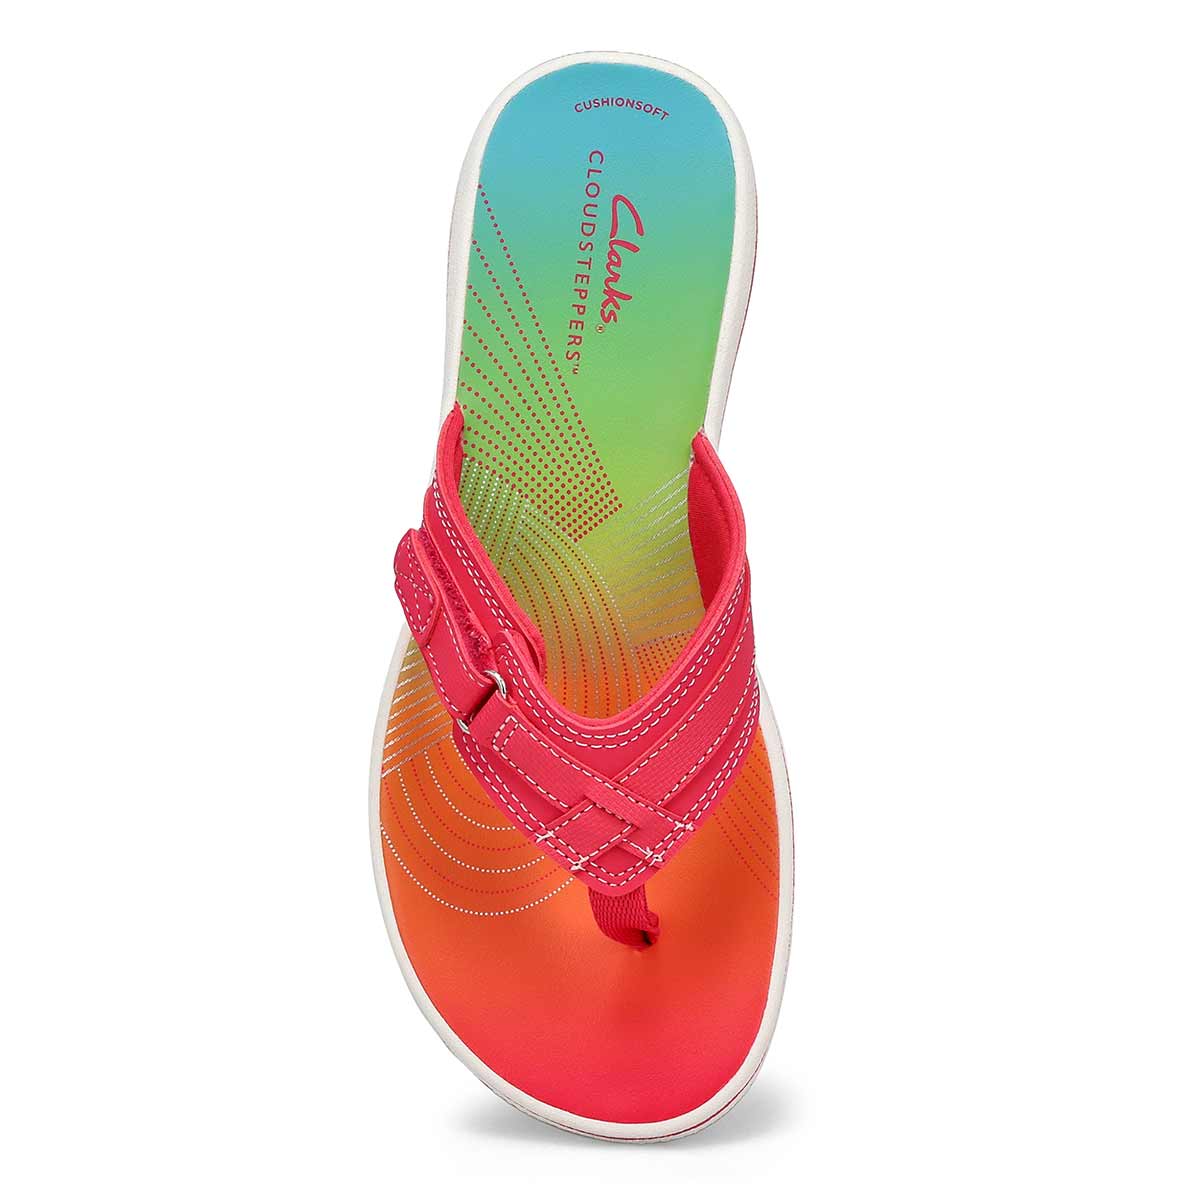 Women's Breeze Sea Thong Sandal - Bright Pink Ombre